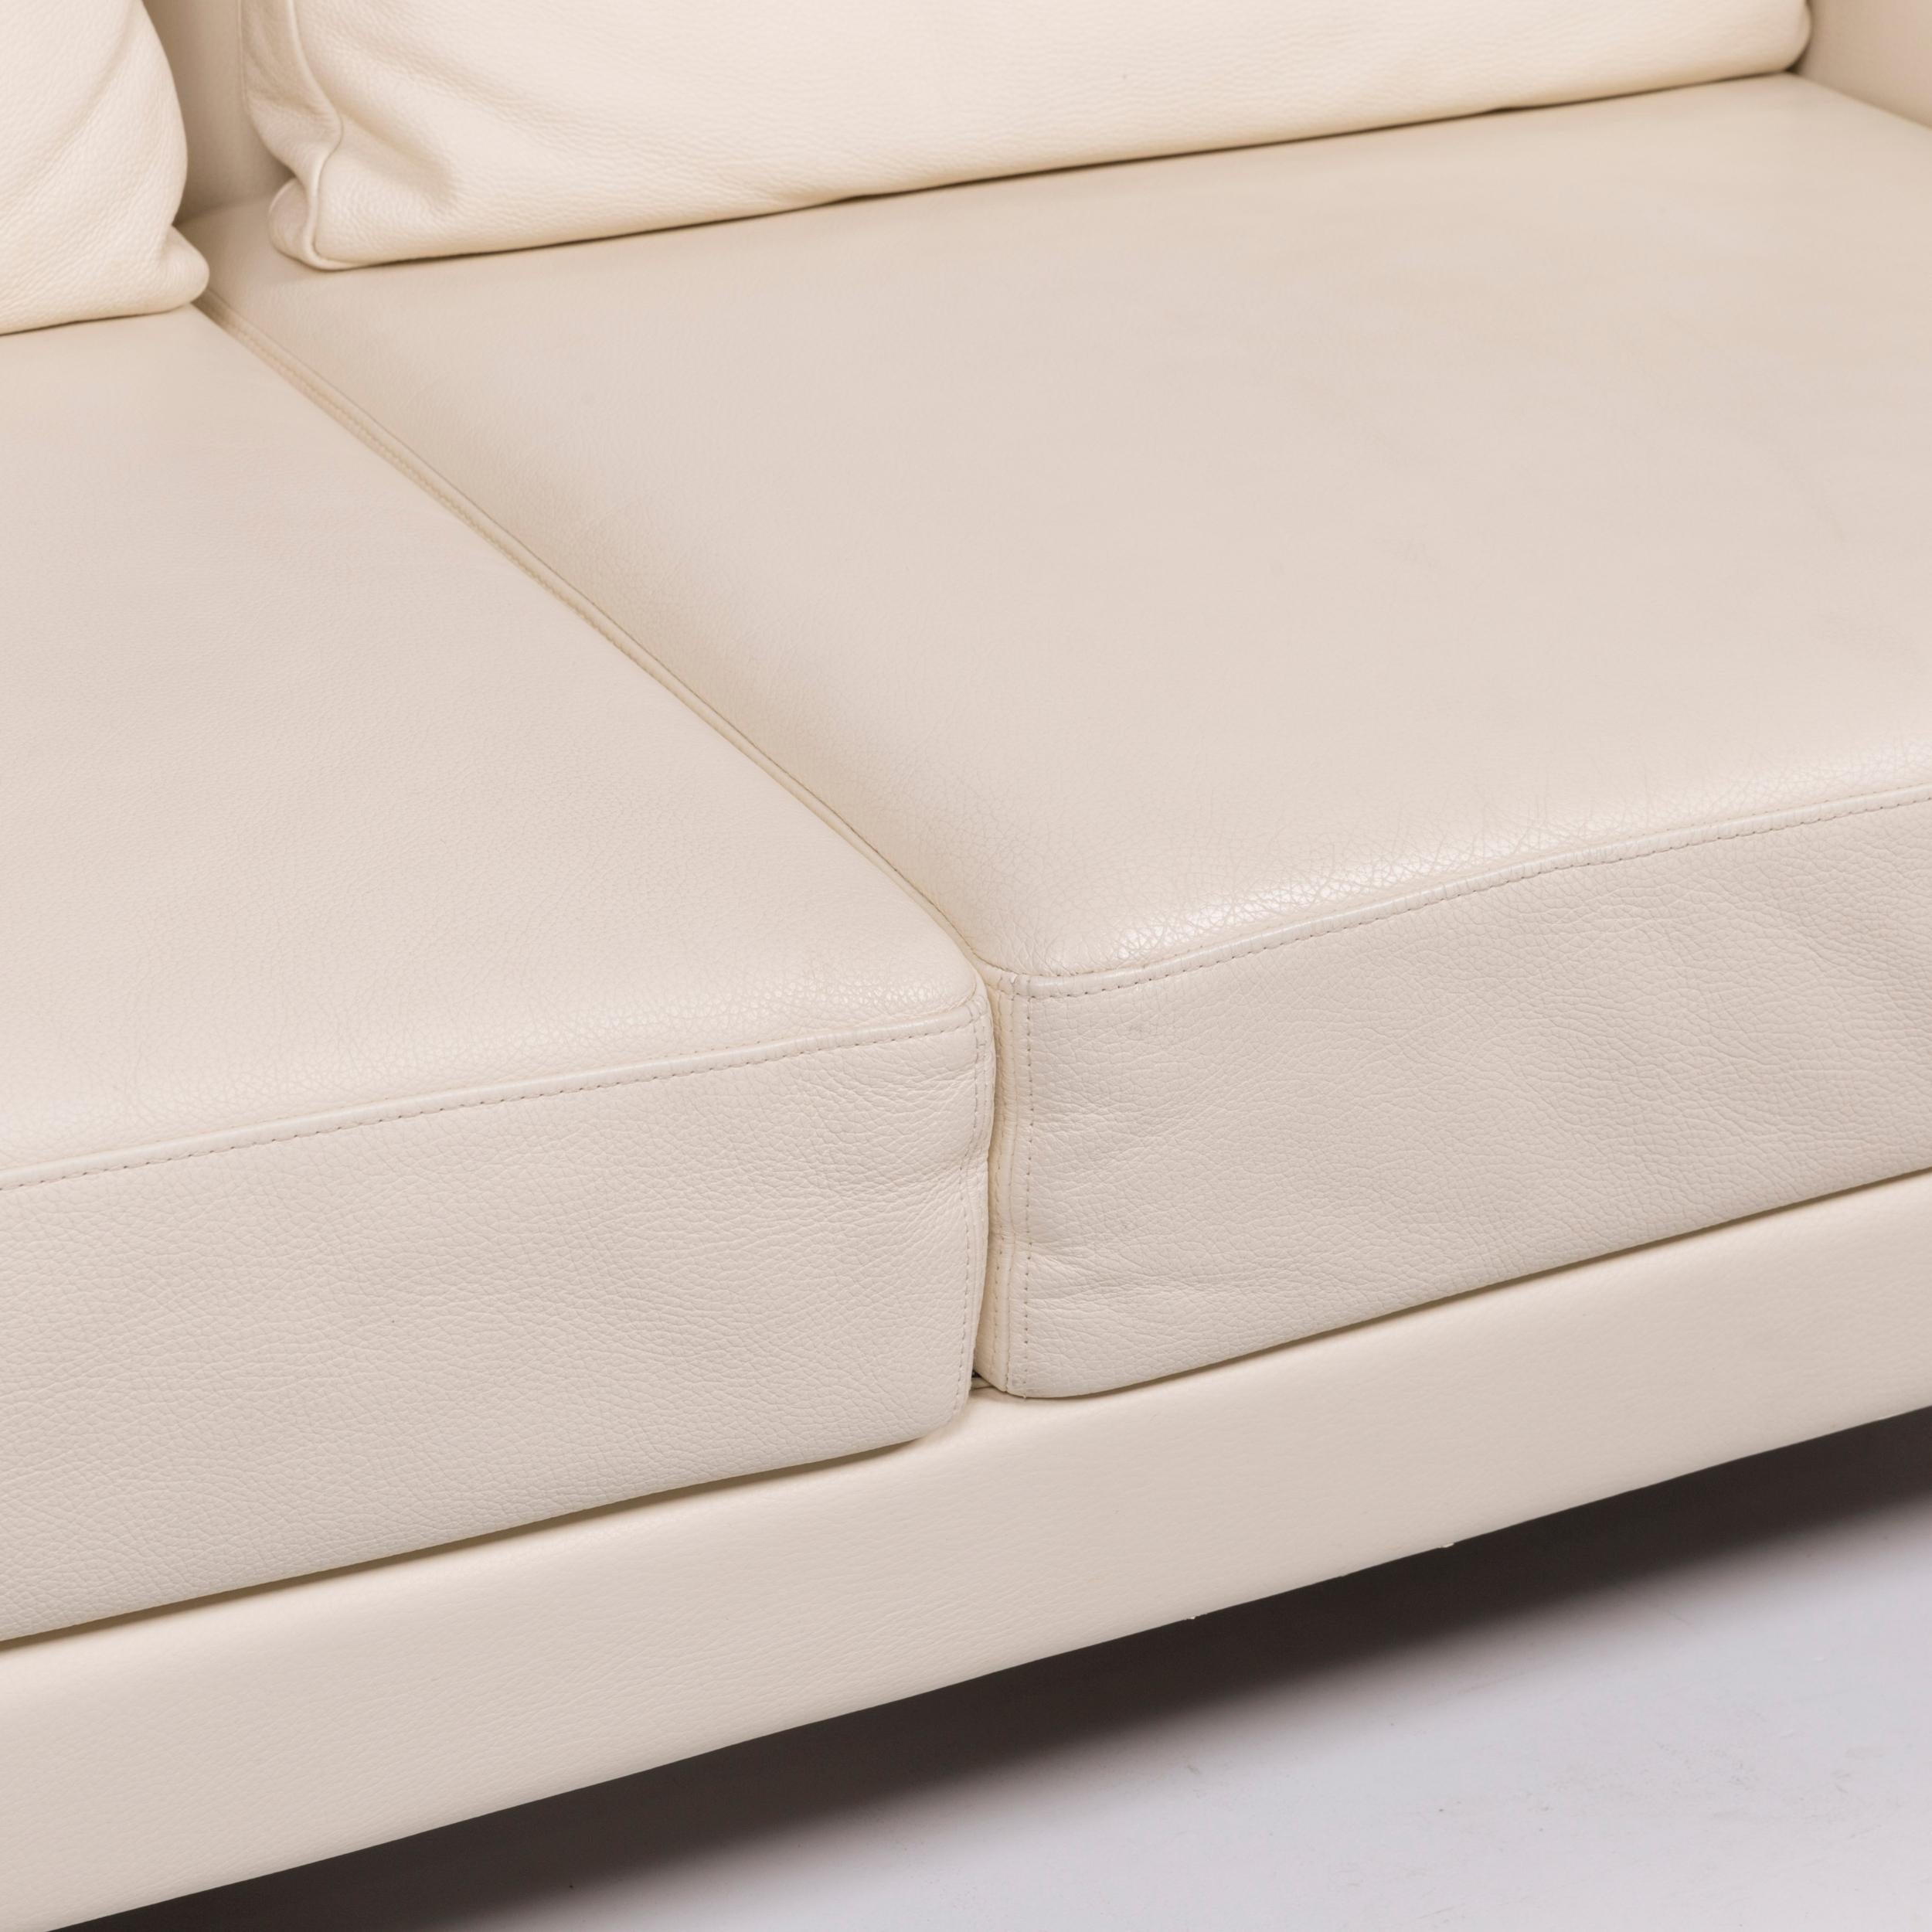 We bring to you a Brühl & Sippold Moule leather sofa cream two-seat.


 Product measurements in centimeters:
 

Depth 85
Width 183
Height 67
Seat-height 38
Rest-height 38
Seat-depth 55
Seat-width 140
Back-height 50.
 